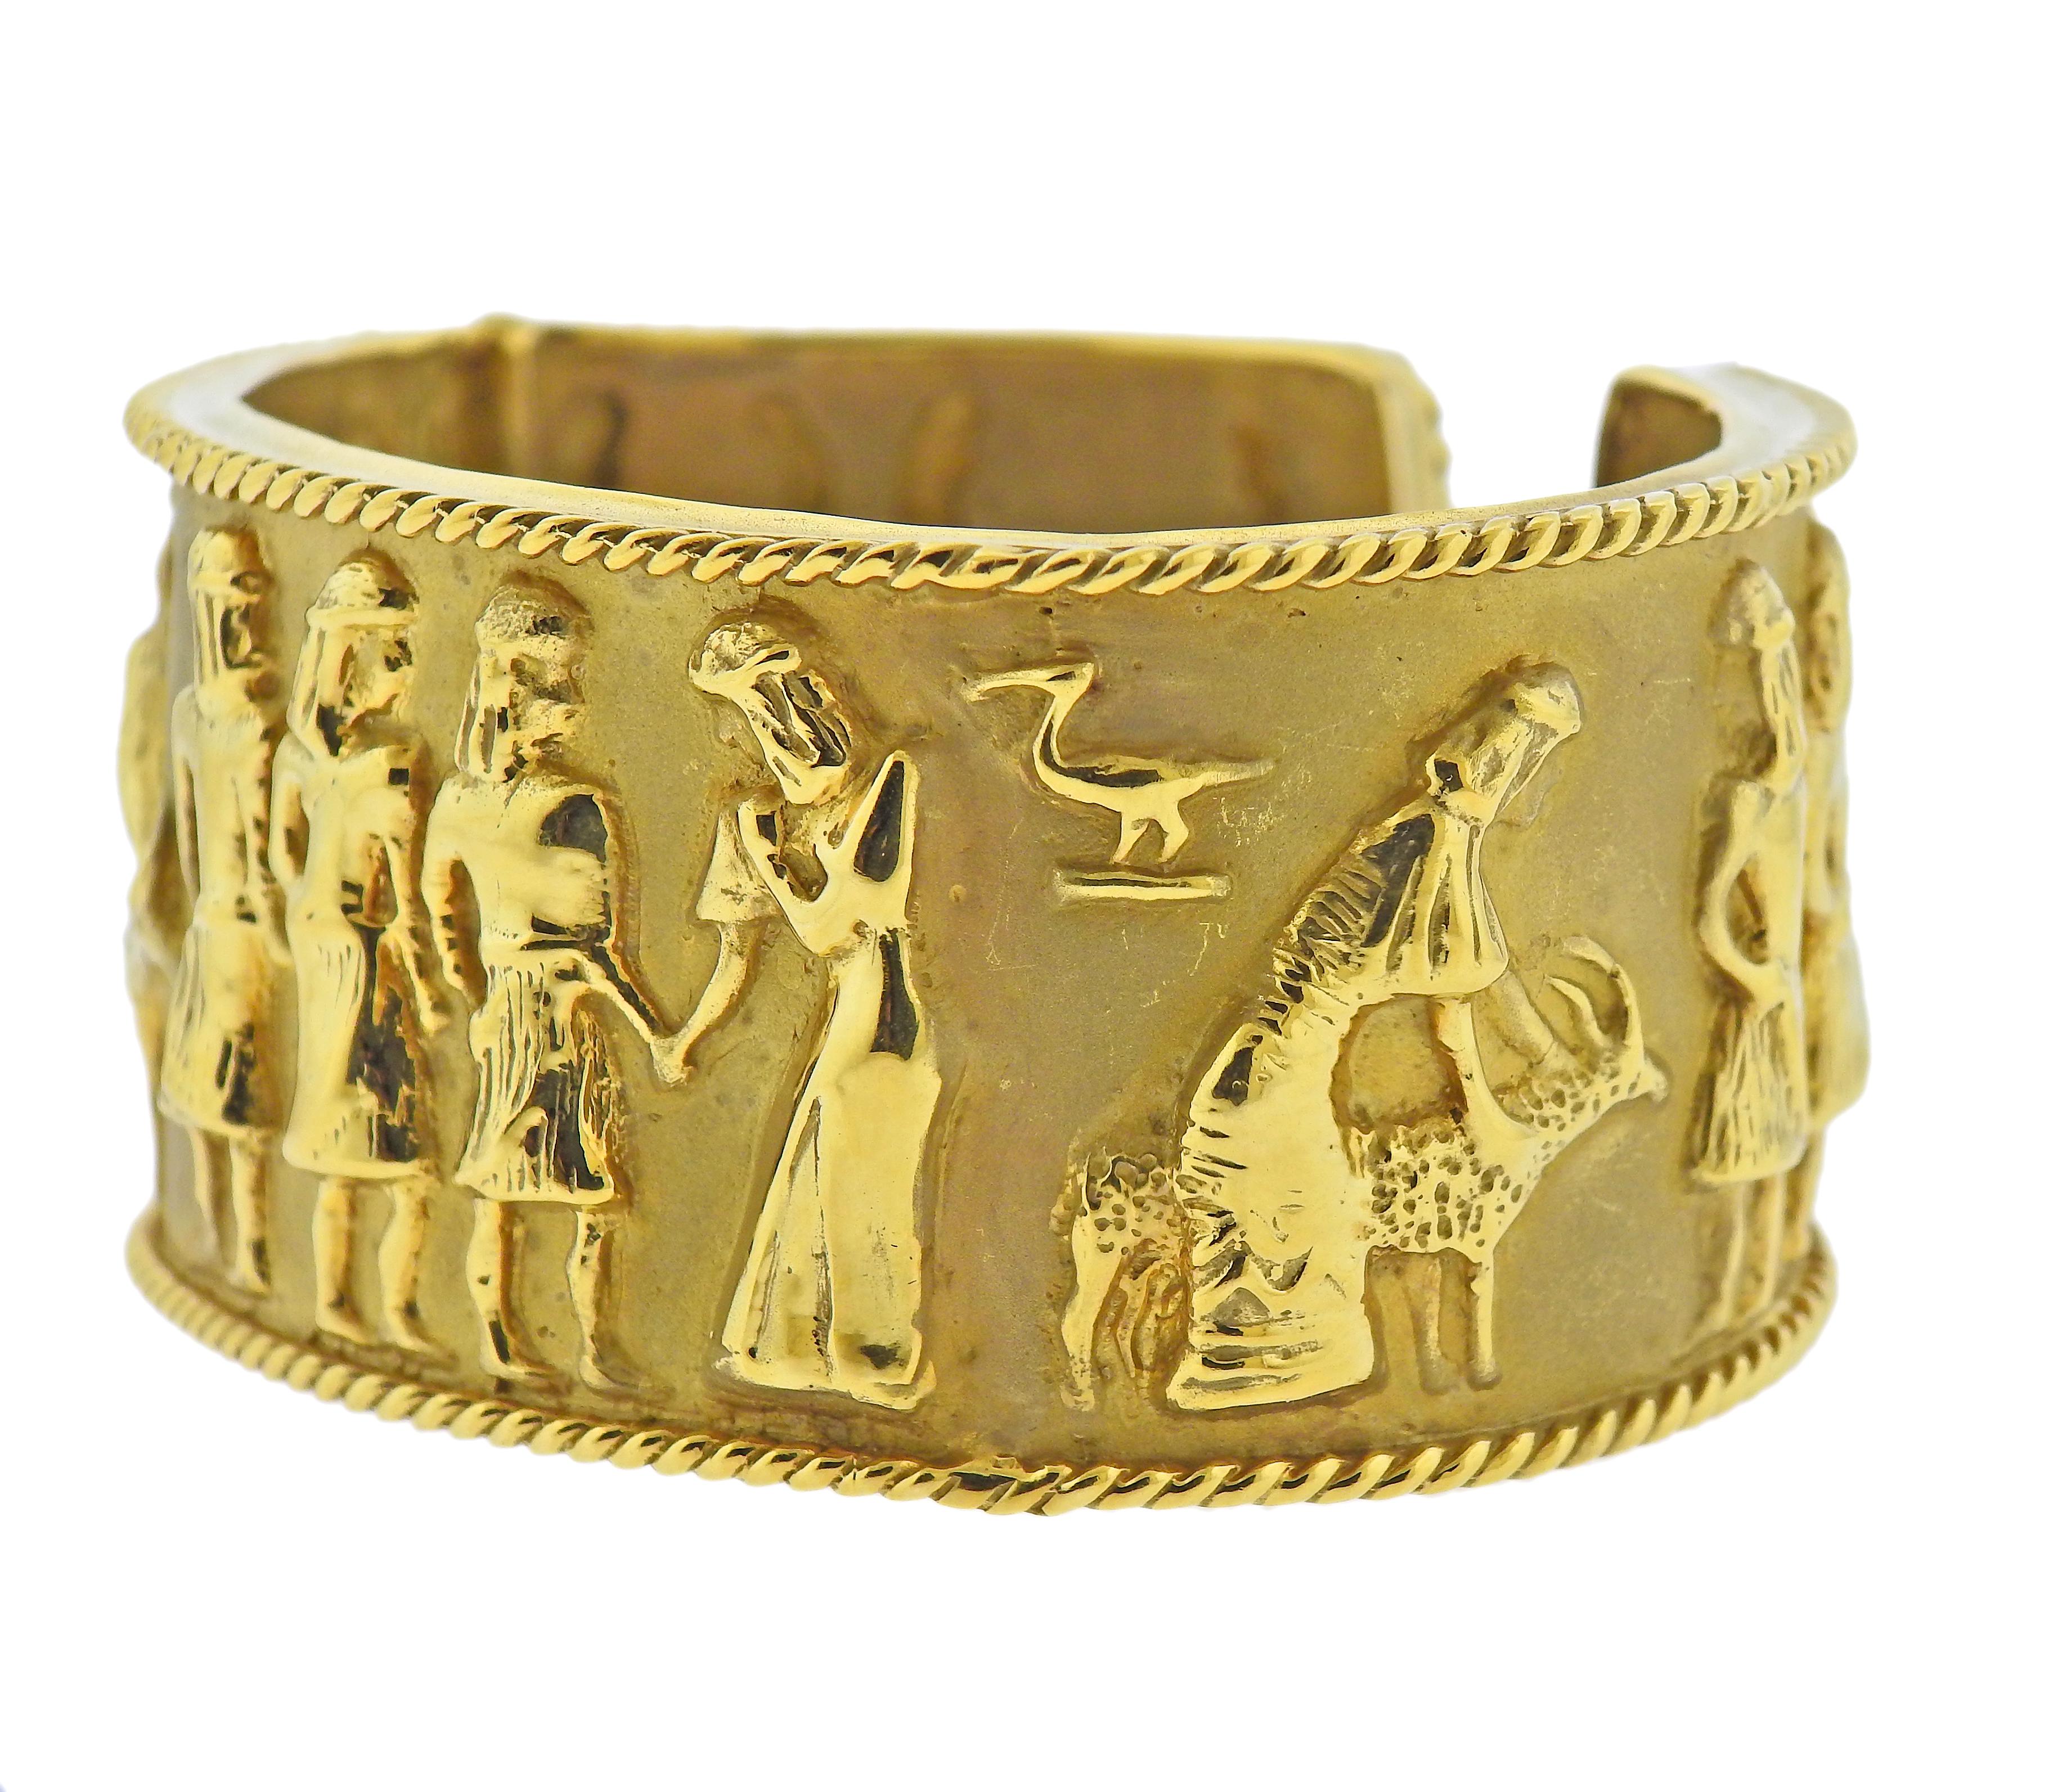 Large 1980s 18k gold cuff bracelet with Egyptian motif ornament. Bracelet will fit approx. 7